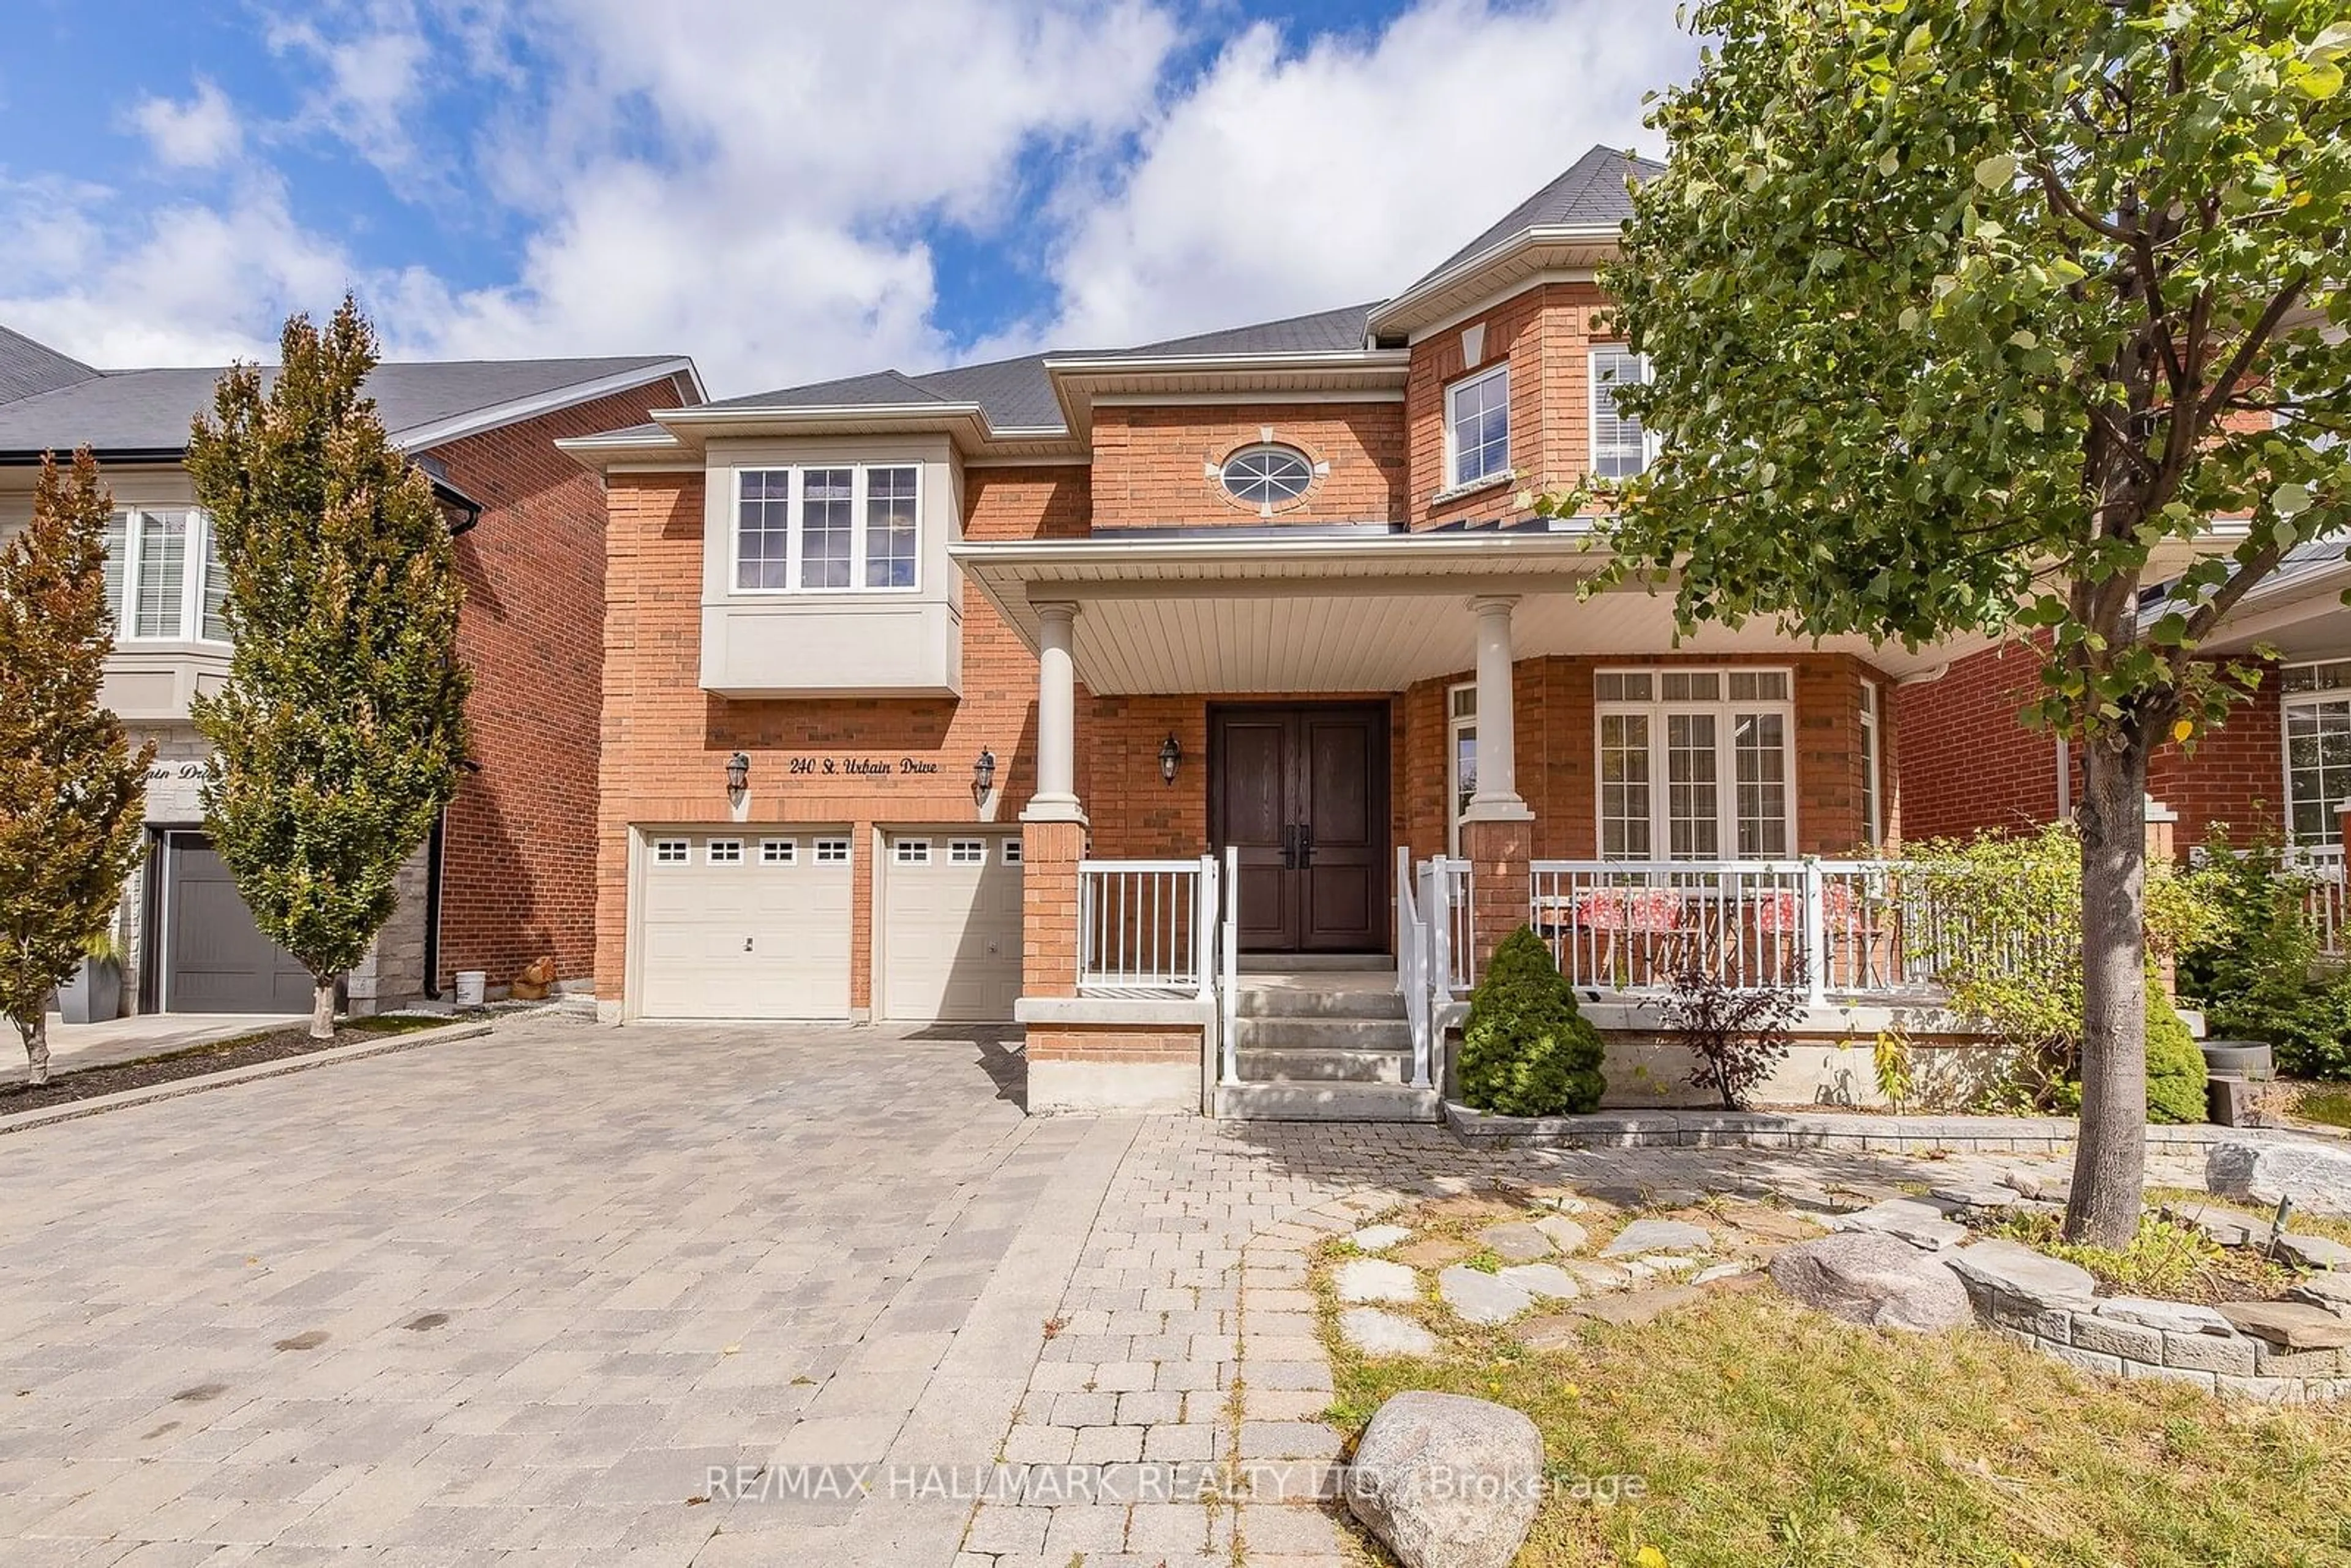 Home with brick exterior material for 240 St.Urbain Dr, Vaughan Ontario L4H 3K7